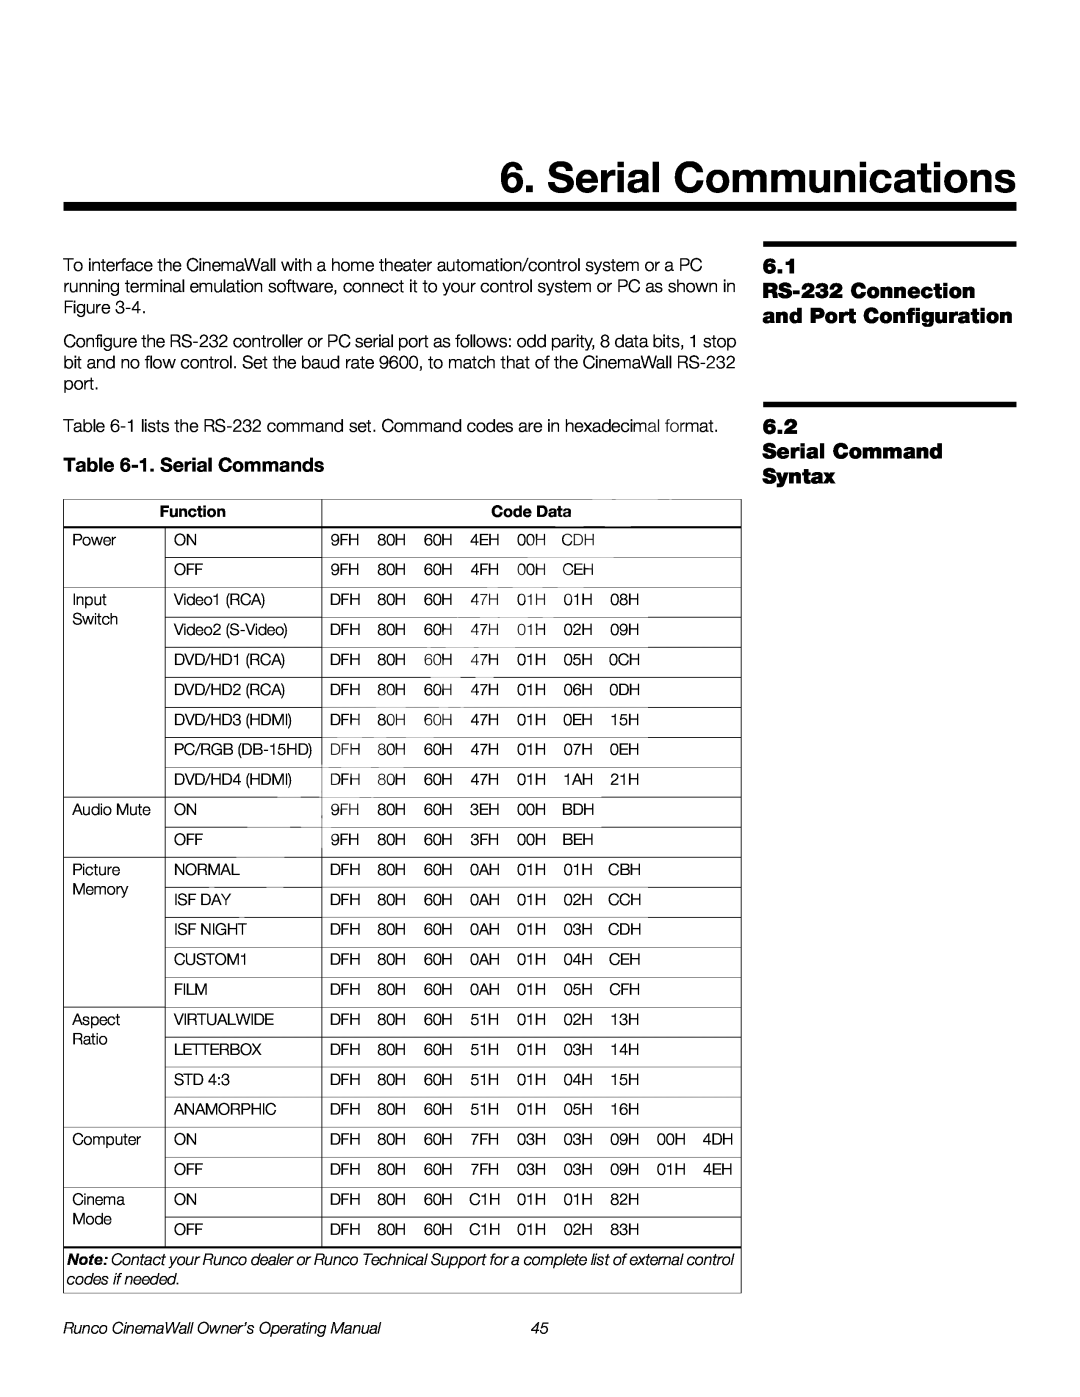 Runco CW-61 Serial Communications, 6.1 RS-232 Connection and Port Configuration, Serial Command Syntax, 1. Serial Commands 